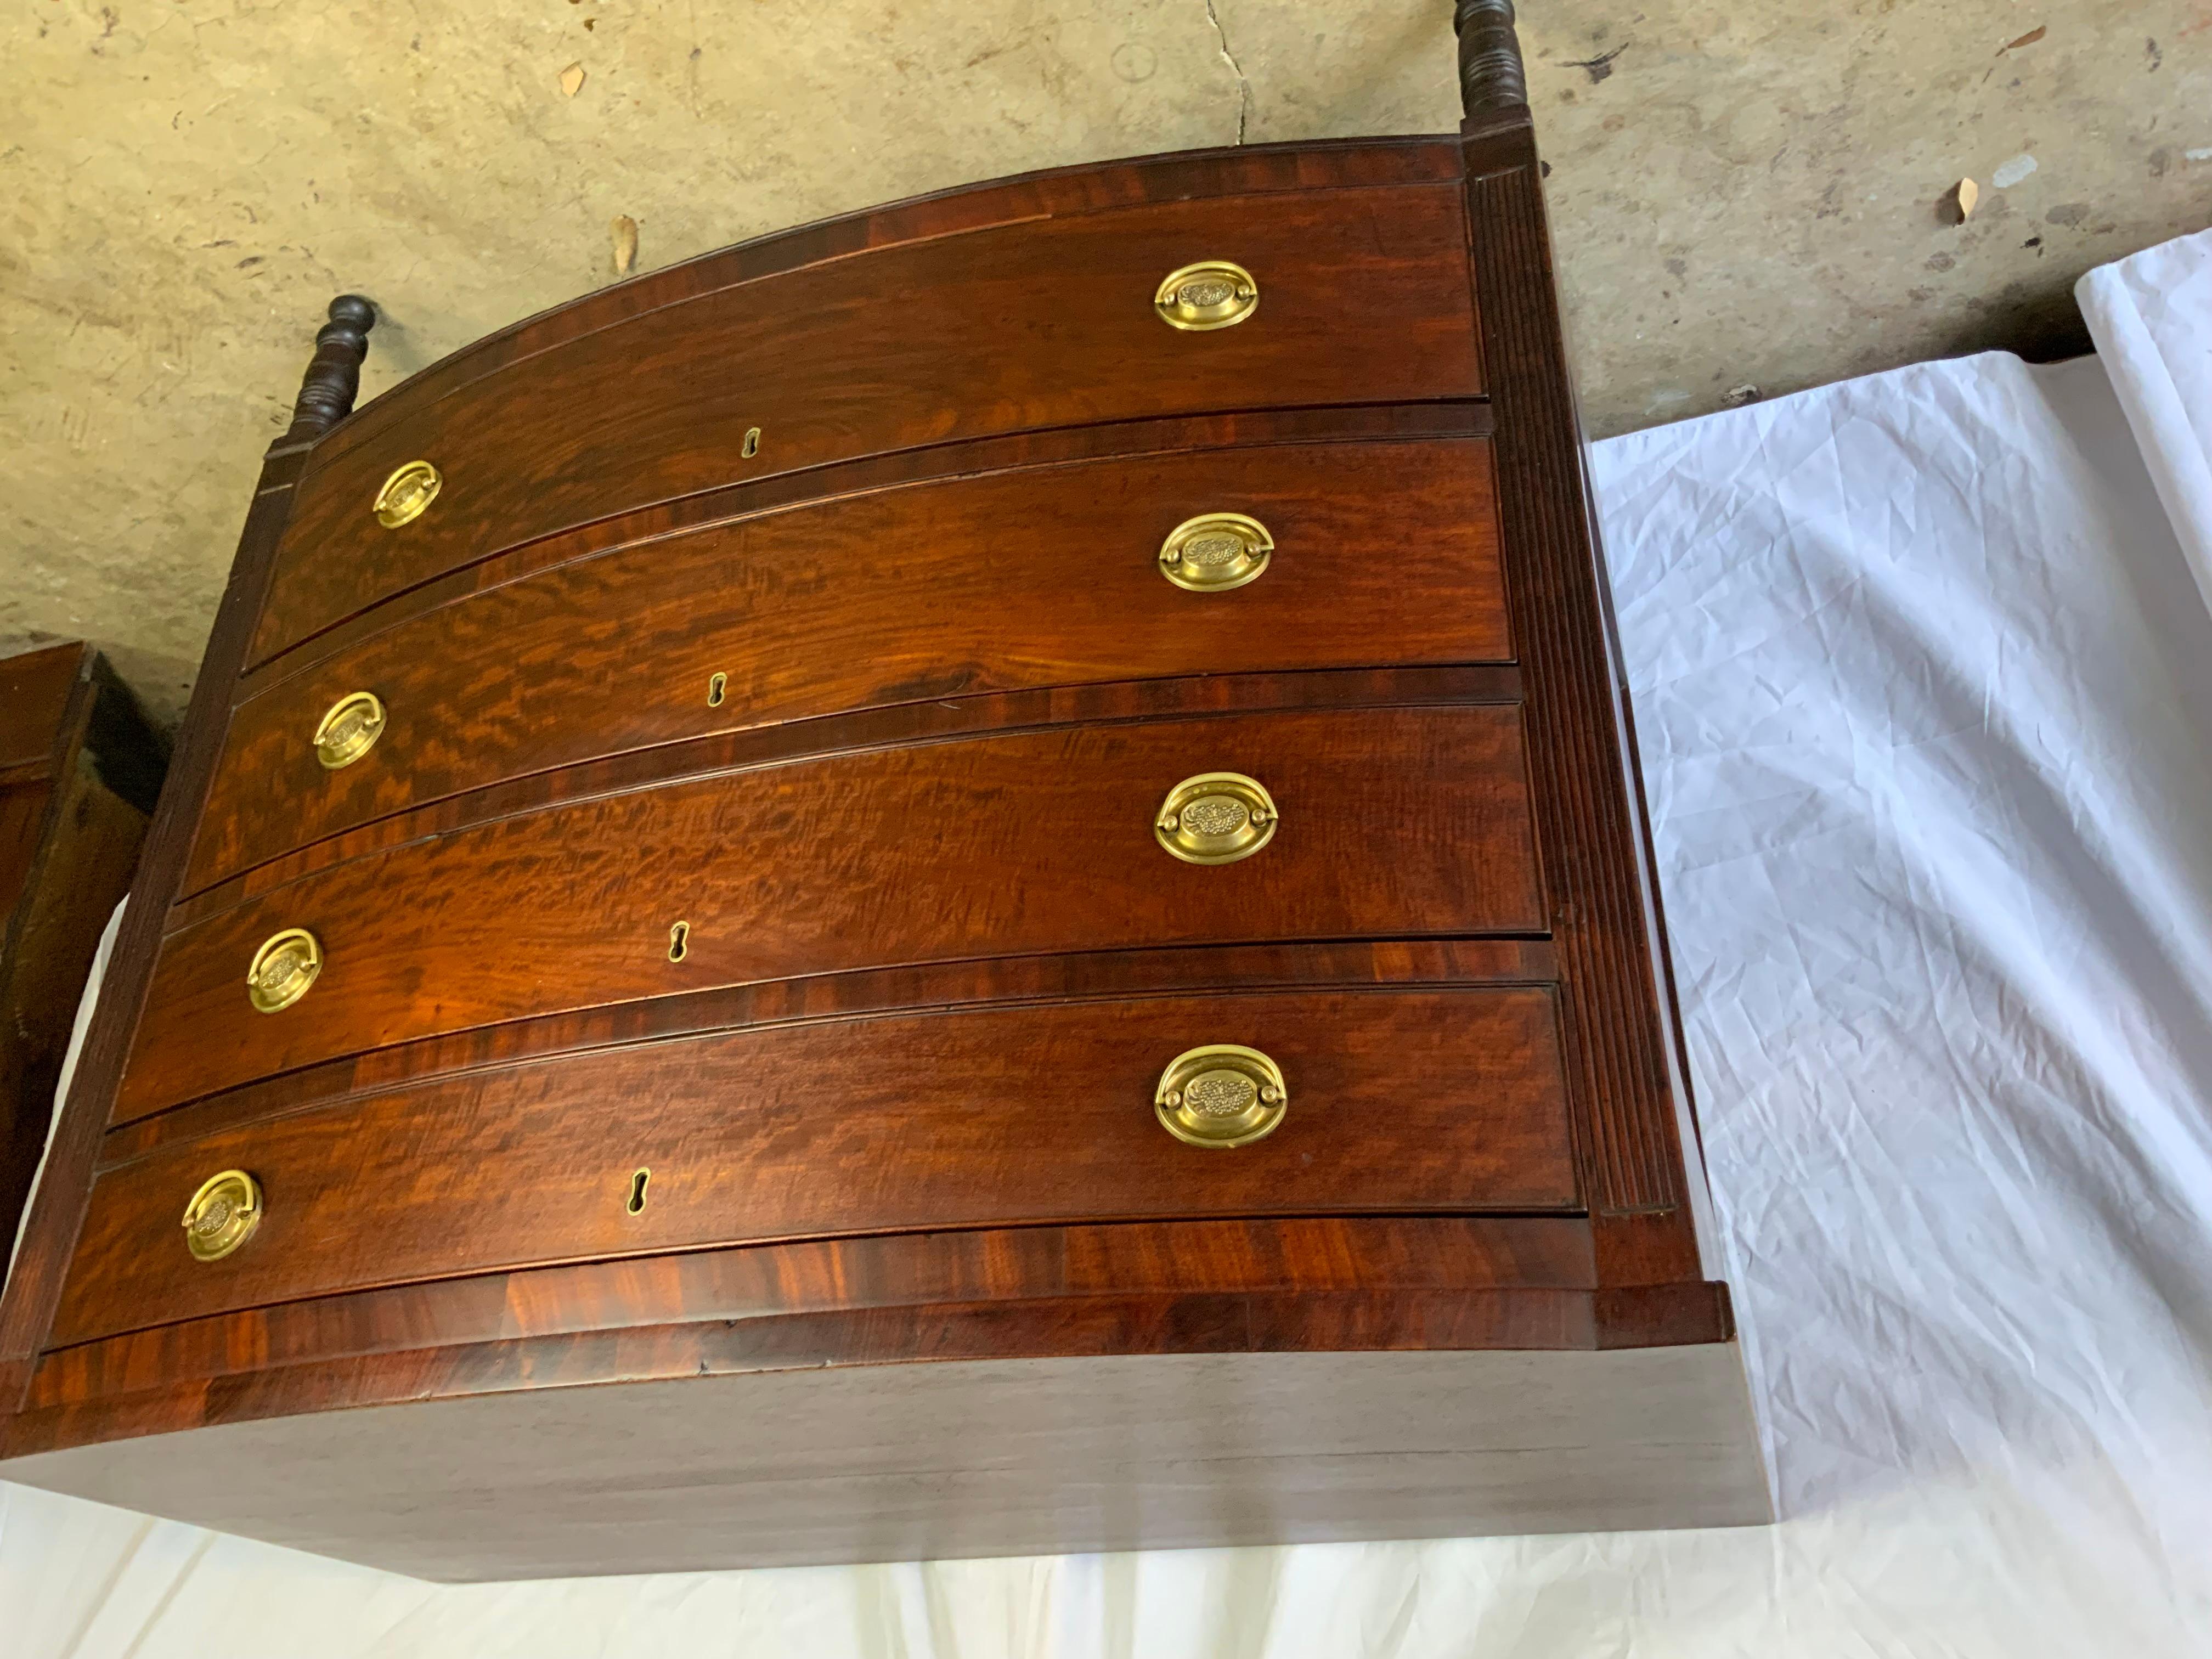 A very pretty 19th century American Sheraton Mahogany chest of drawers.  Old refinish in very good condition with all drawers gliding smoothly in the case. Replaced older drawer hardware.  Cock beaded drawers surrounded by nicely figured Mahogany